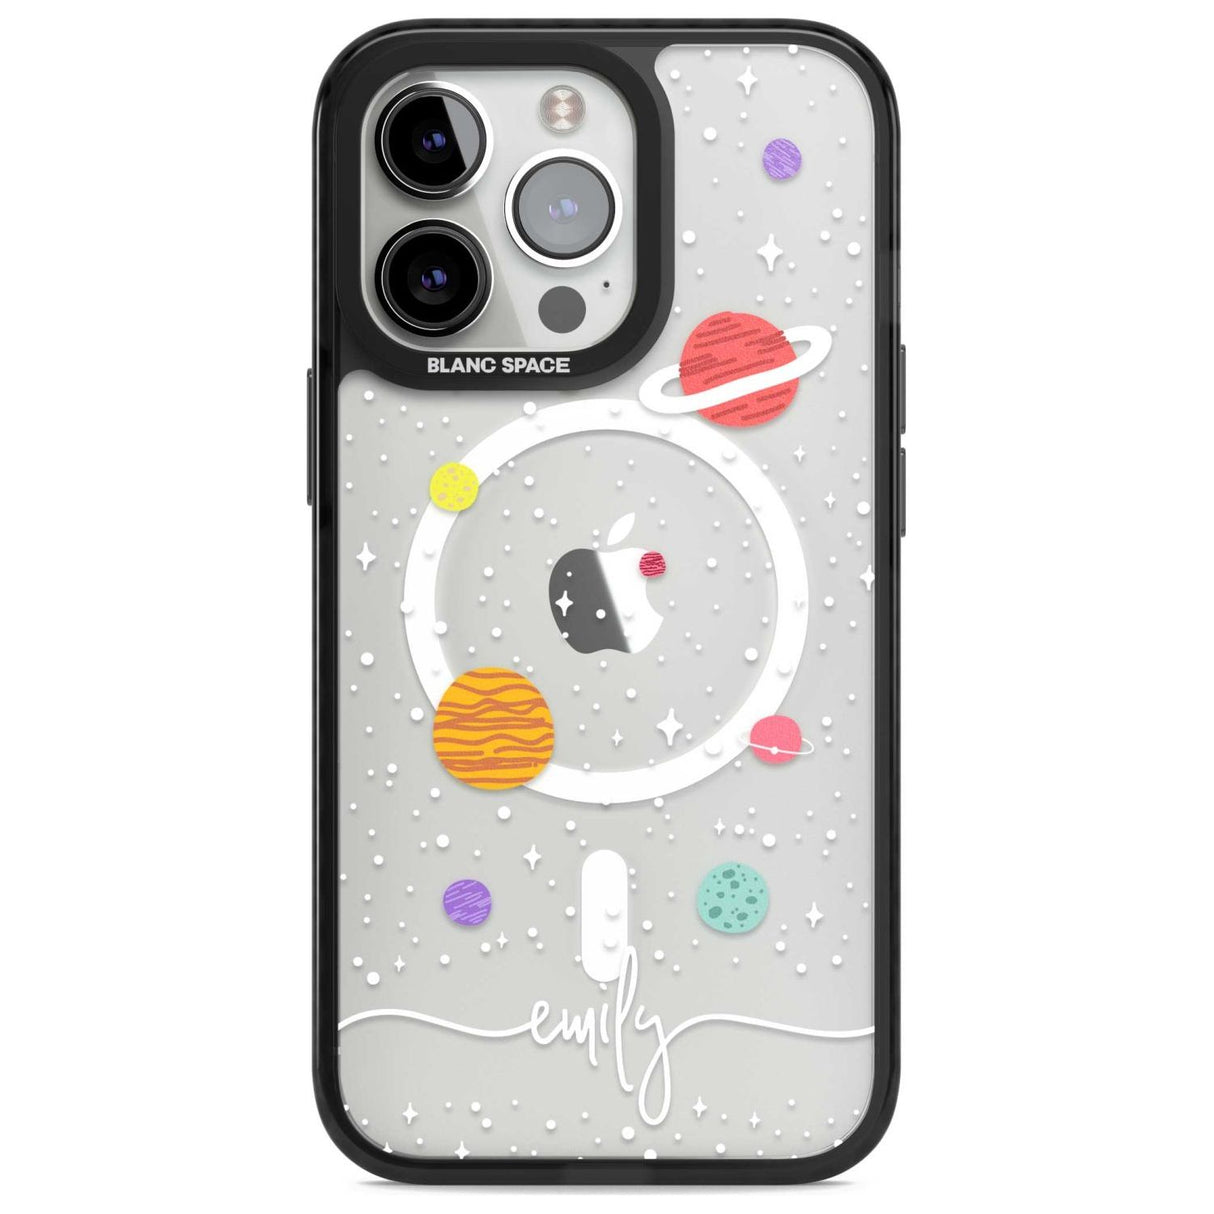 Personalised Cute Cartoon Planets (Clear) Phone Case iPhone 15 Pro Max / Magsafe Black Impact Case,iPhone 15 Pro / Magsafe Black Impact Case,iPhone 14 Pro Max / Magsafe Black Impact Case,iPhone 14 Pro / Magsafe Black Impact Case,iPhone 13 Pro / Magsafe Black Impact Case Blanc Space